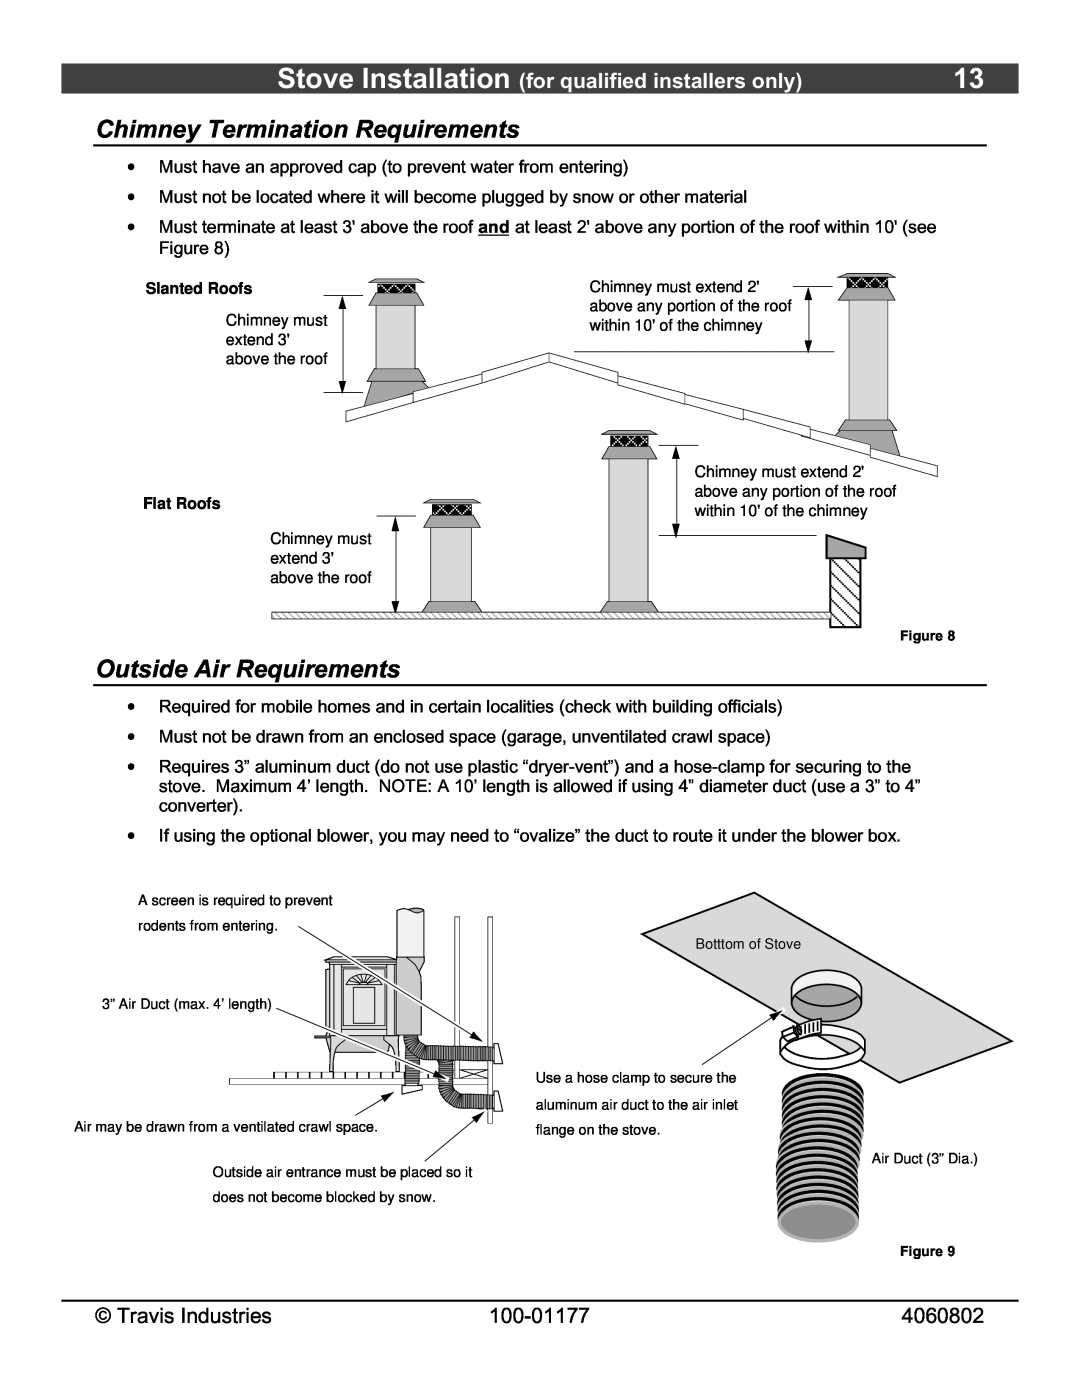 Lopi Chimney Termination Requirements, Outside Air Requirements, Stove Installation for qualified installers only, Flat 